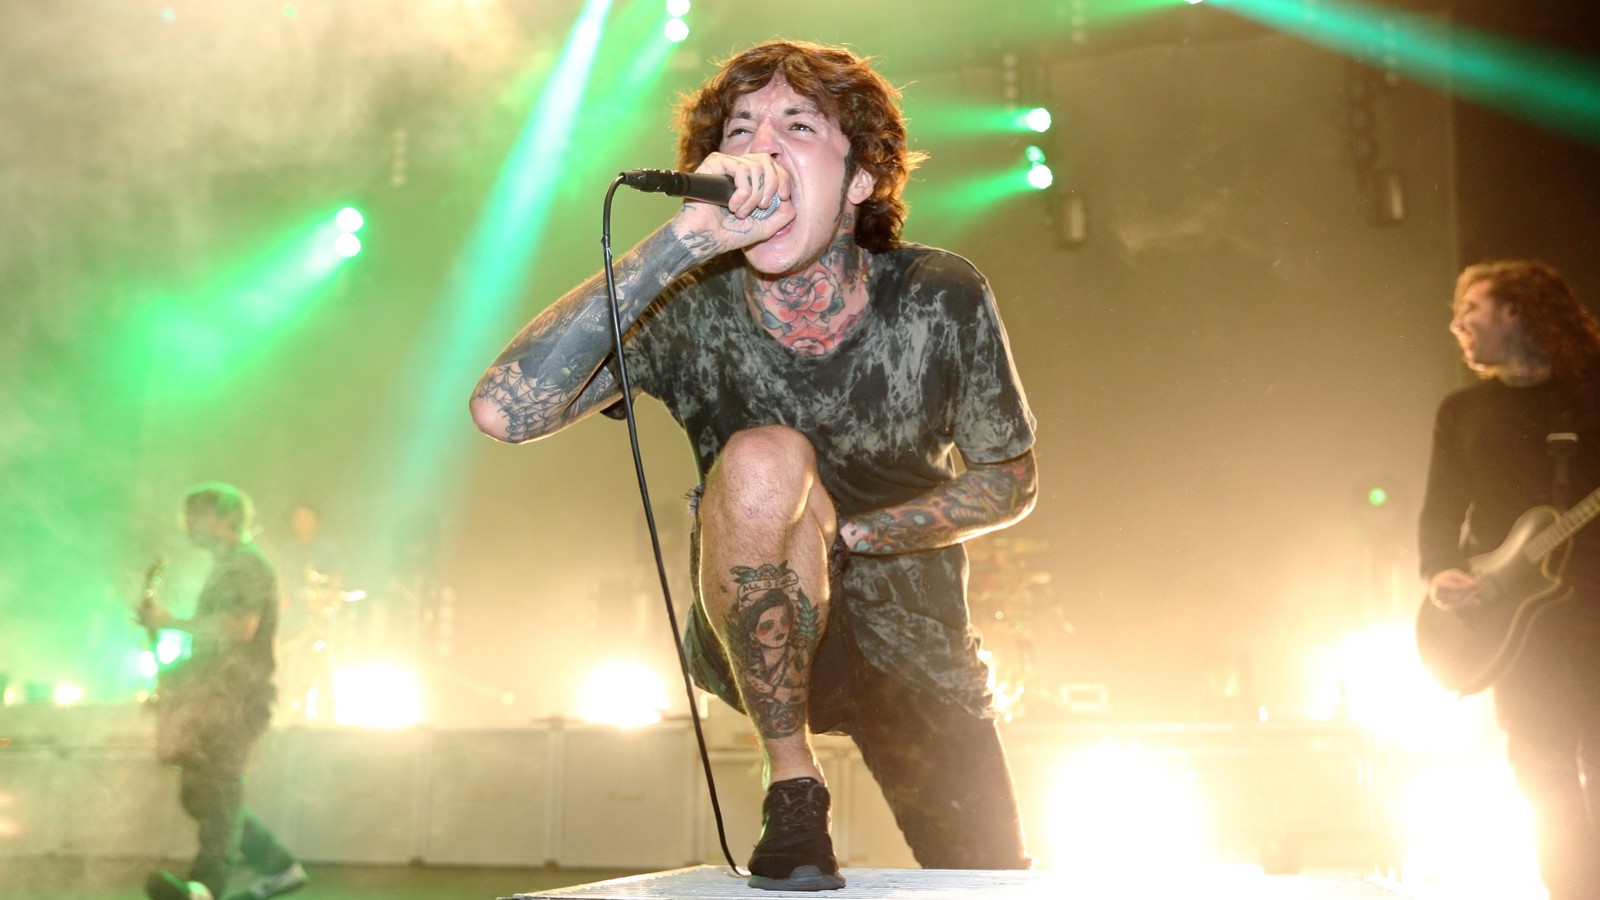 Bring Me The Horizon - Shadow Moses (Official Video) 